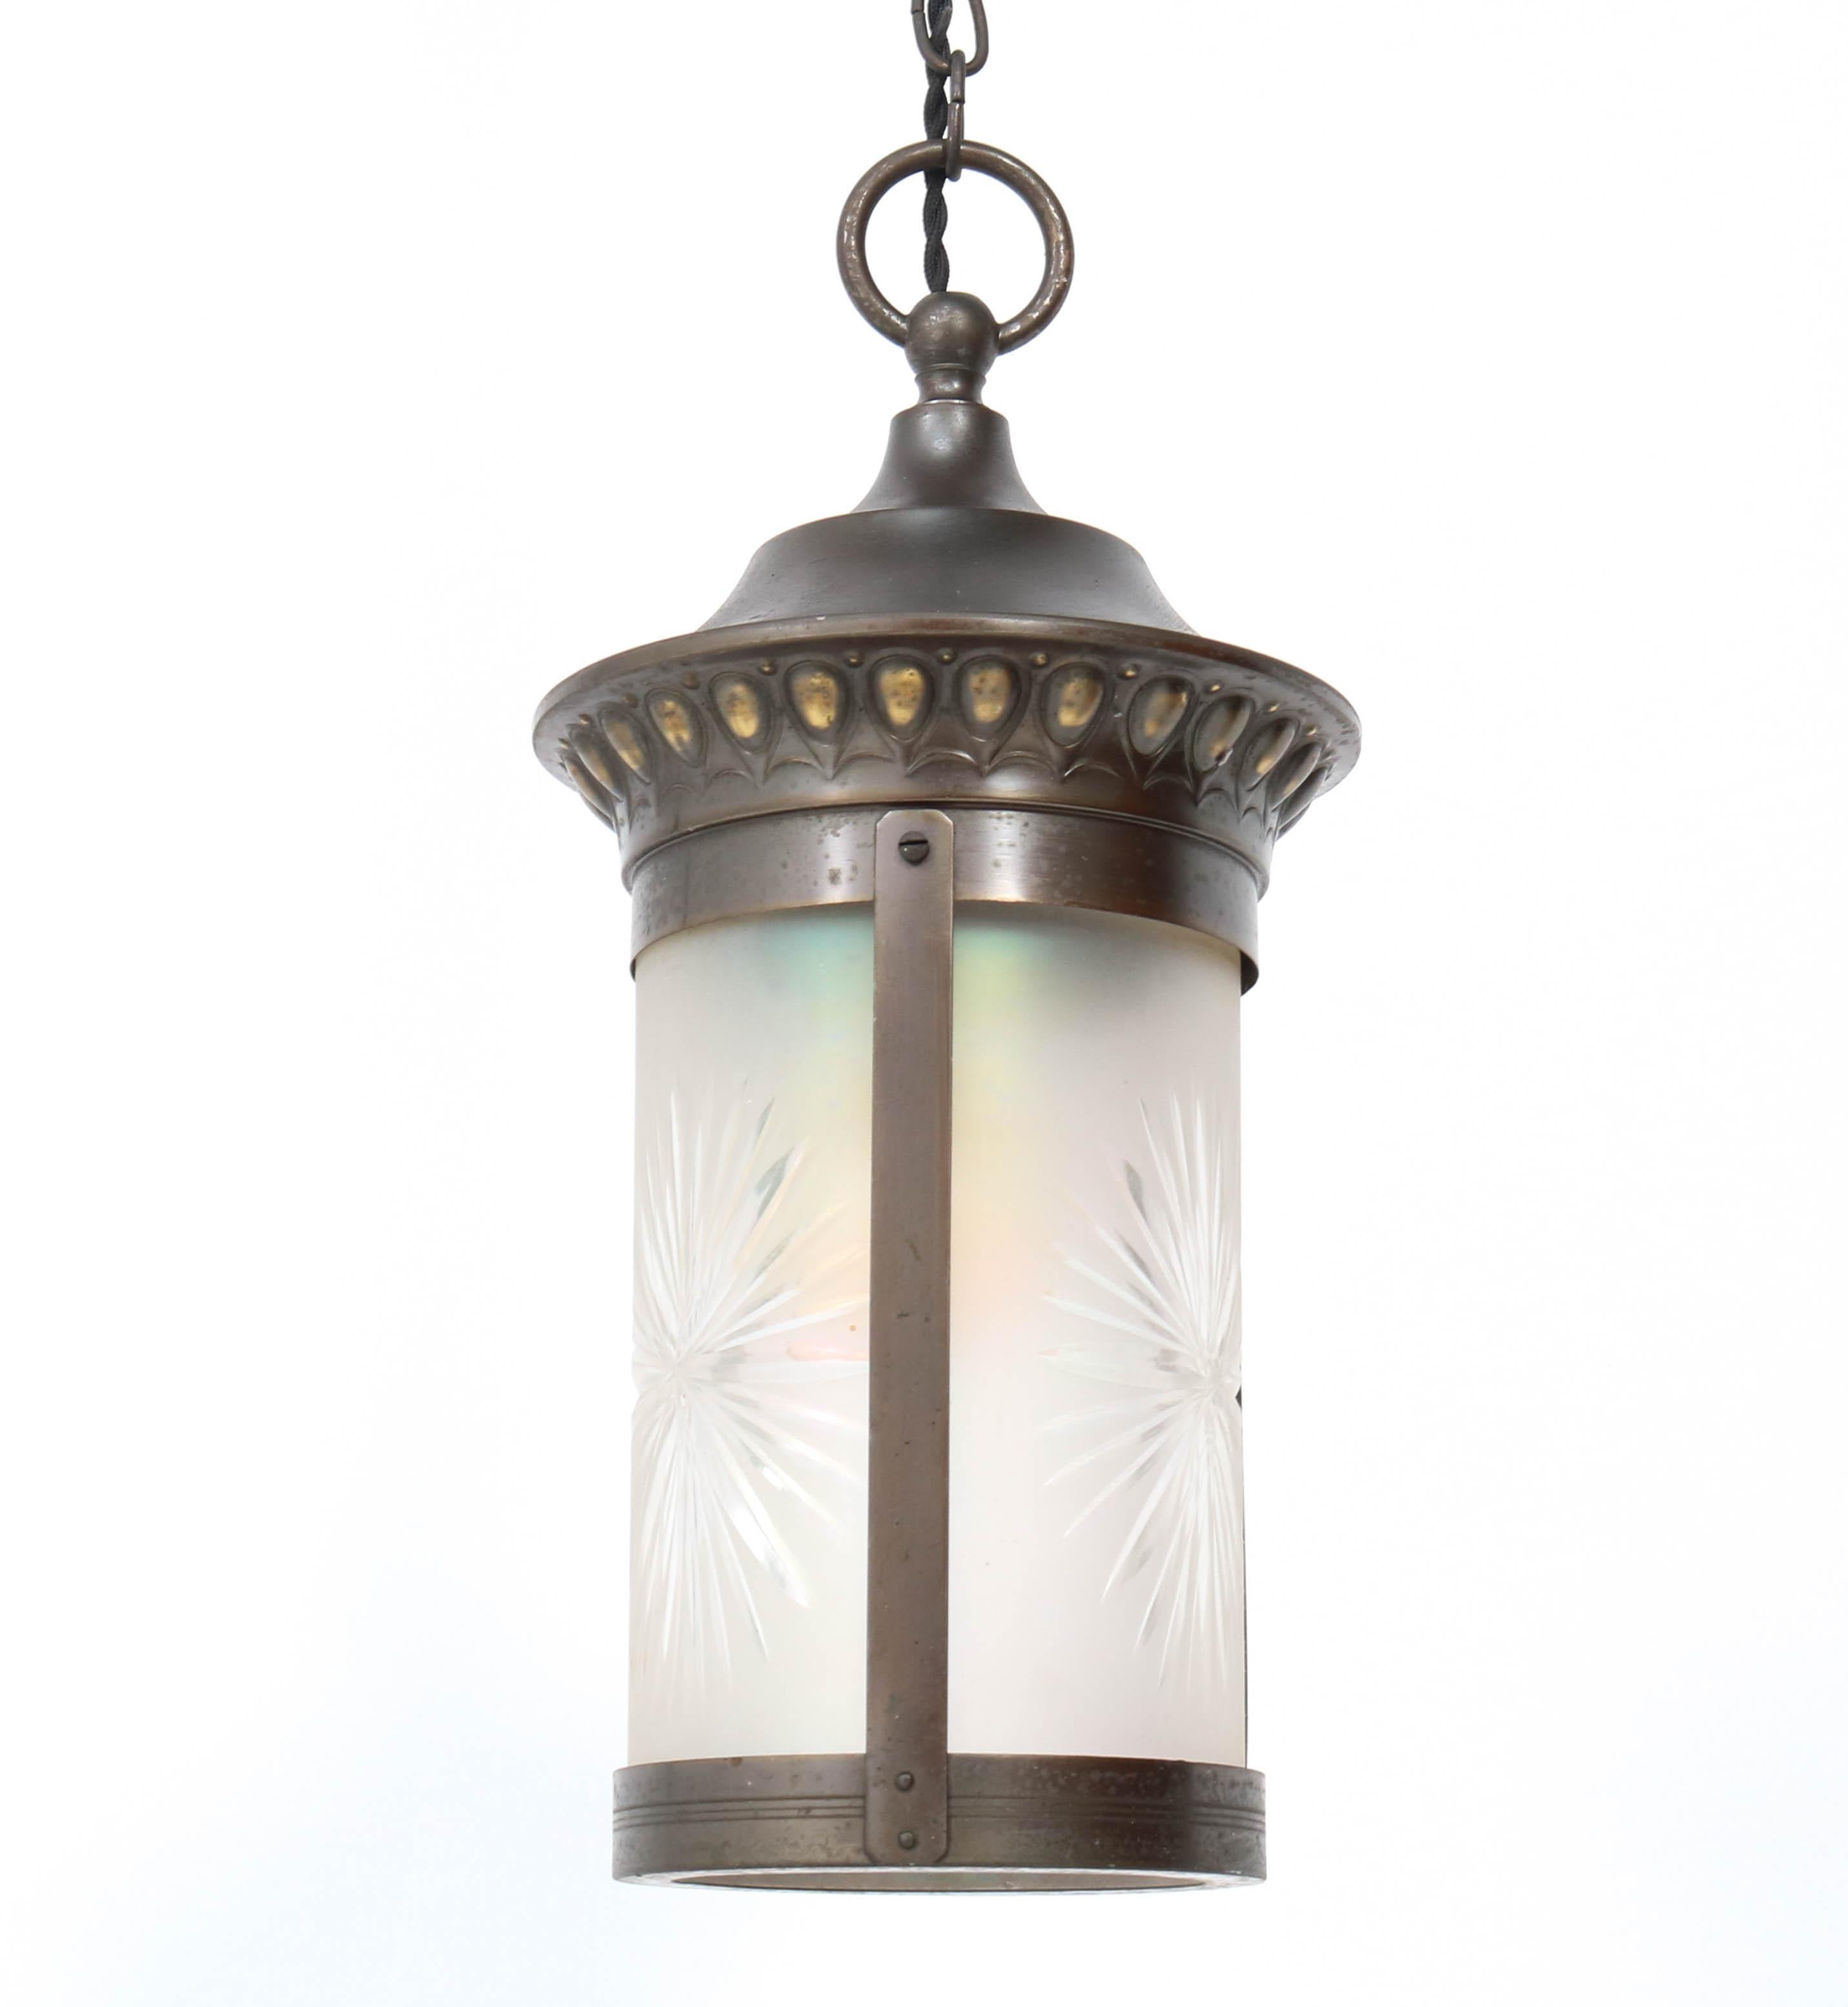 Wonderful Art Nouveau lantern.
Striking Dutch design from the 1900s.
Patinated brass frame with original etched glass.
Rewired with one socket for E27 light bulb.
In very good condition with a beautiful patina.
 